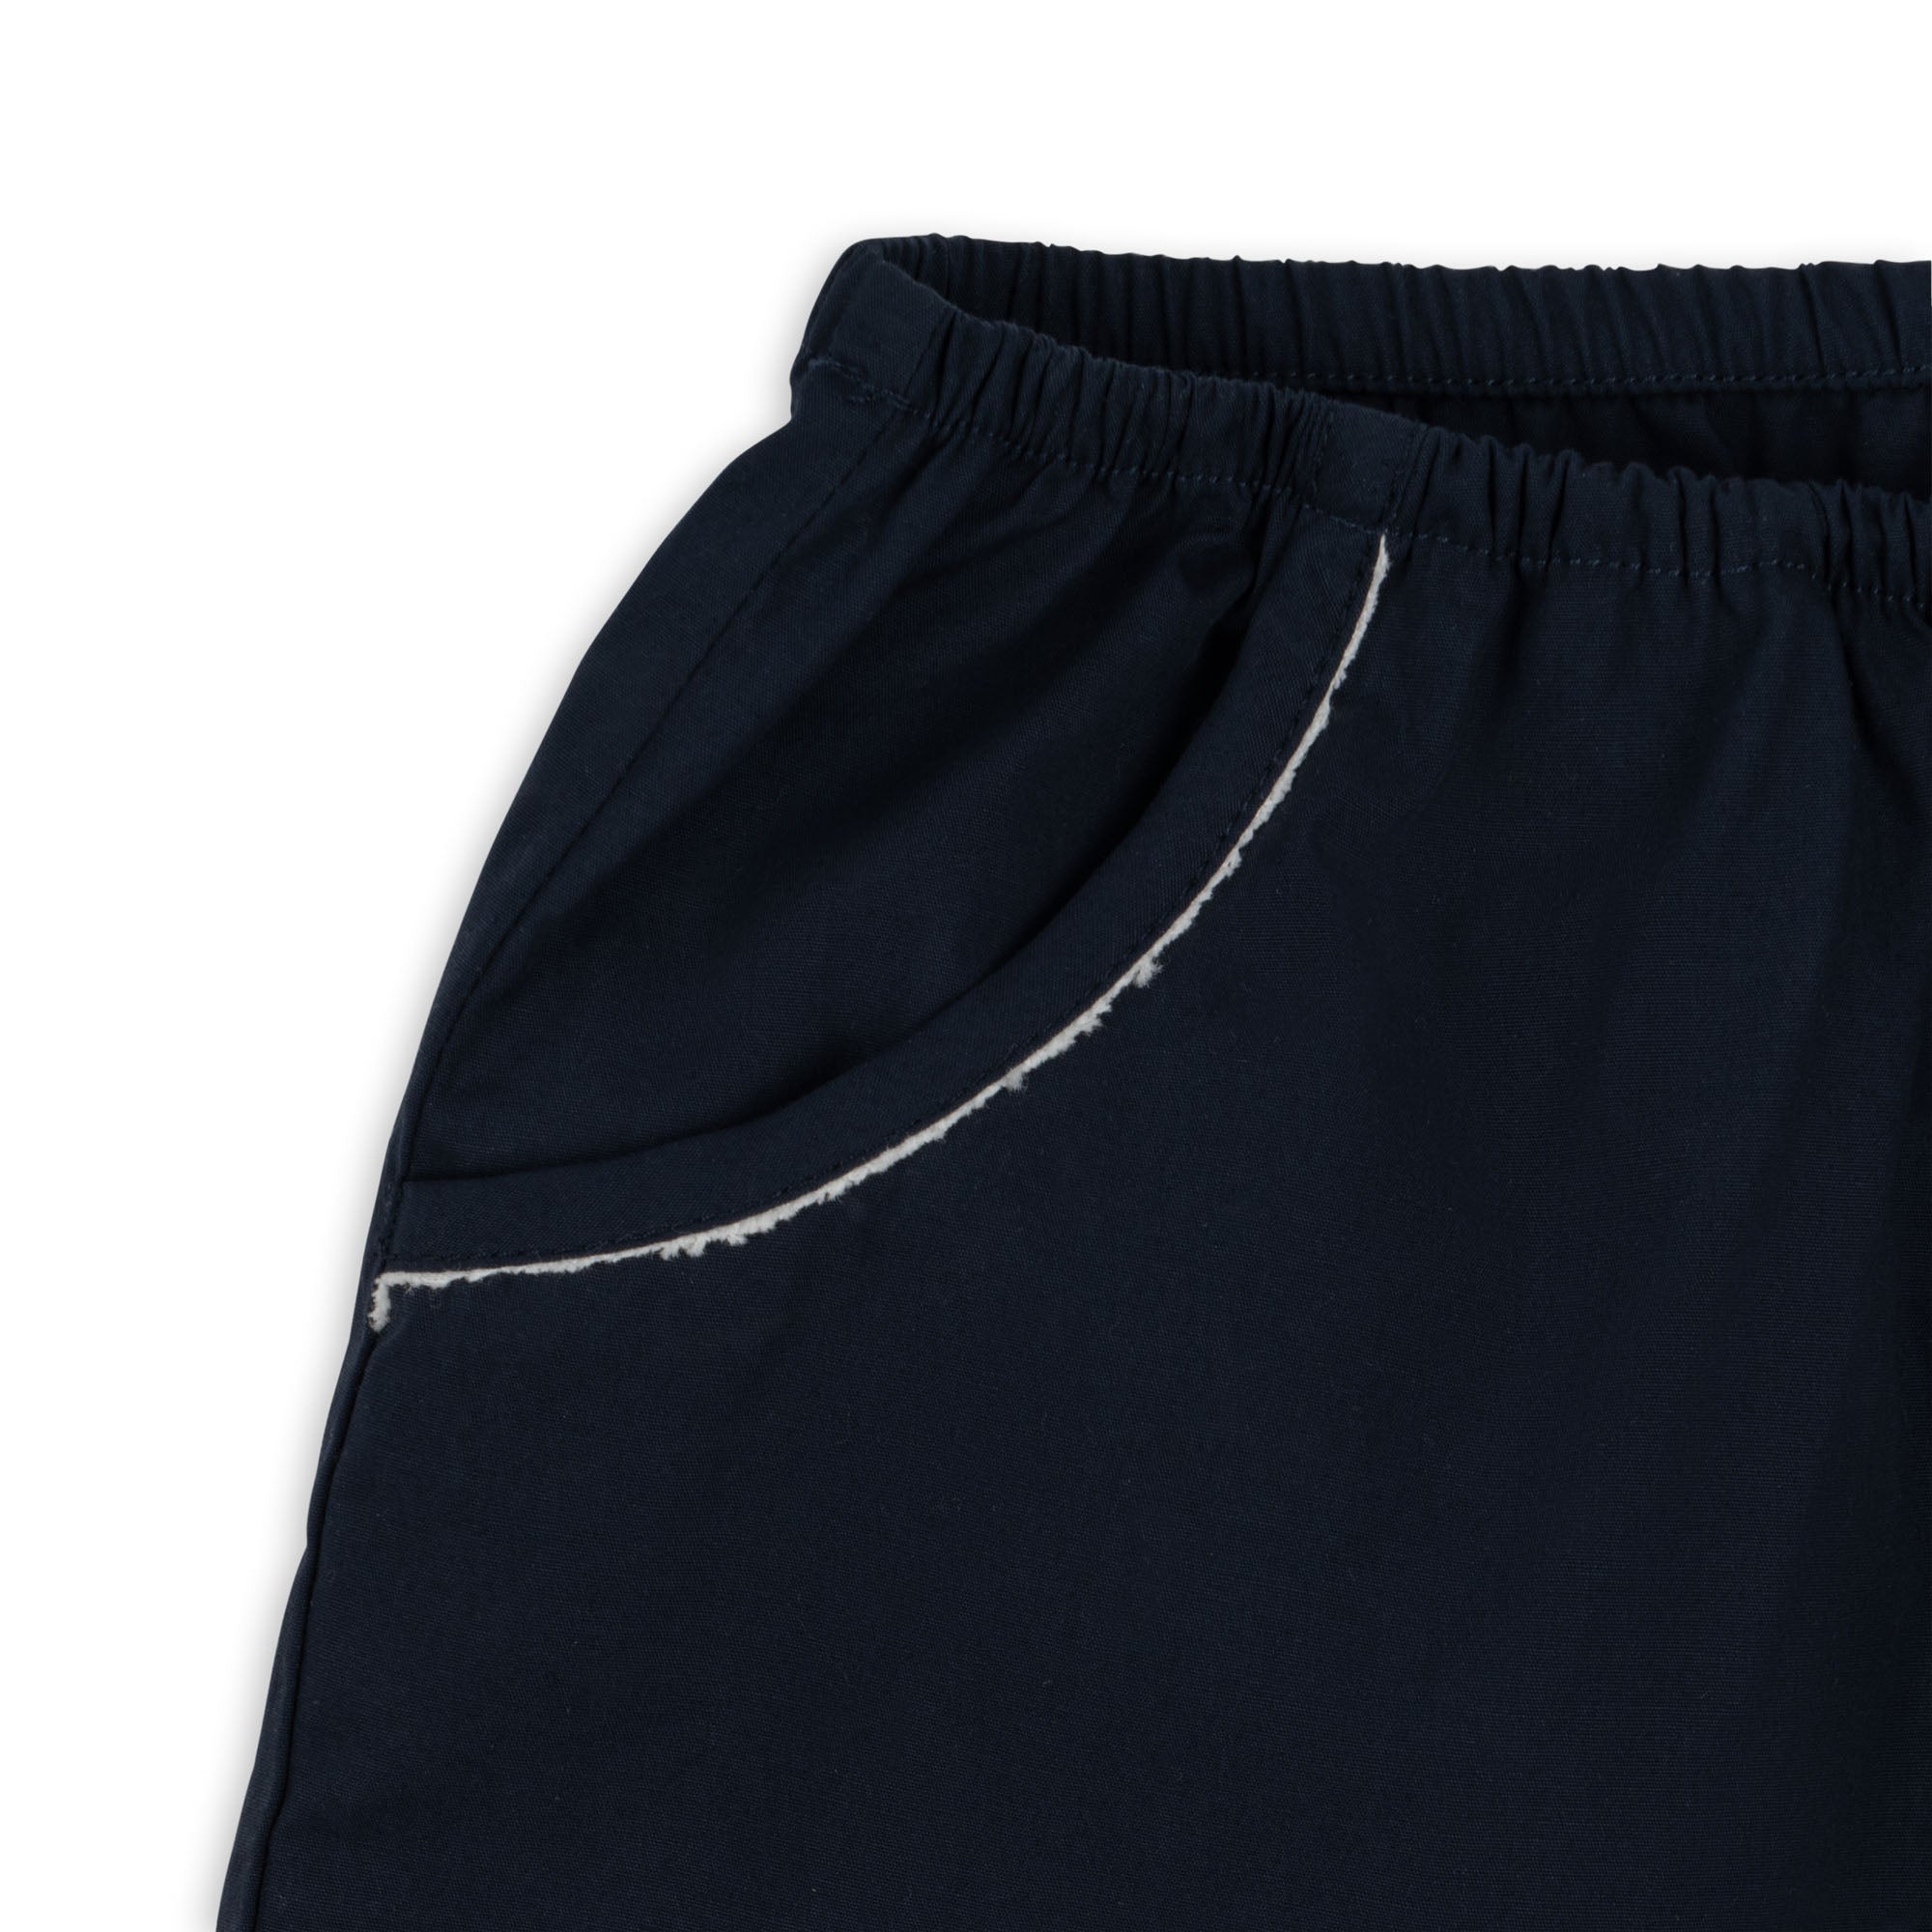 Konges Sløjd A/S WOVEN SHORTS & BLOOMERS TOTAL ECLIPSE